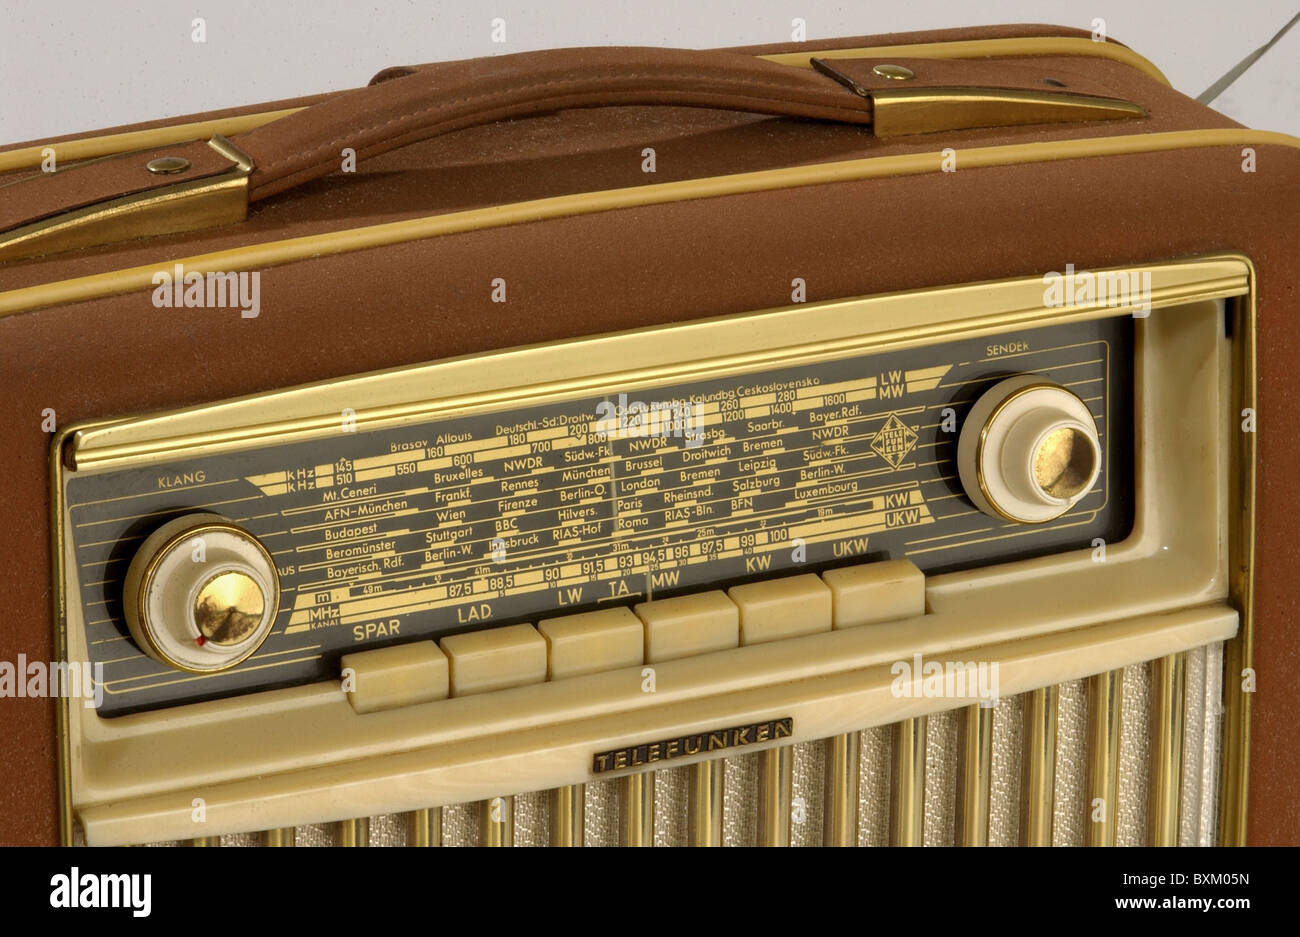 broadcast, radio, radio set Telefunken Bajazzo, detail, Germany, 1955,  Additional-Rights-Clearences-Not Available Stock Photo - Alamy